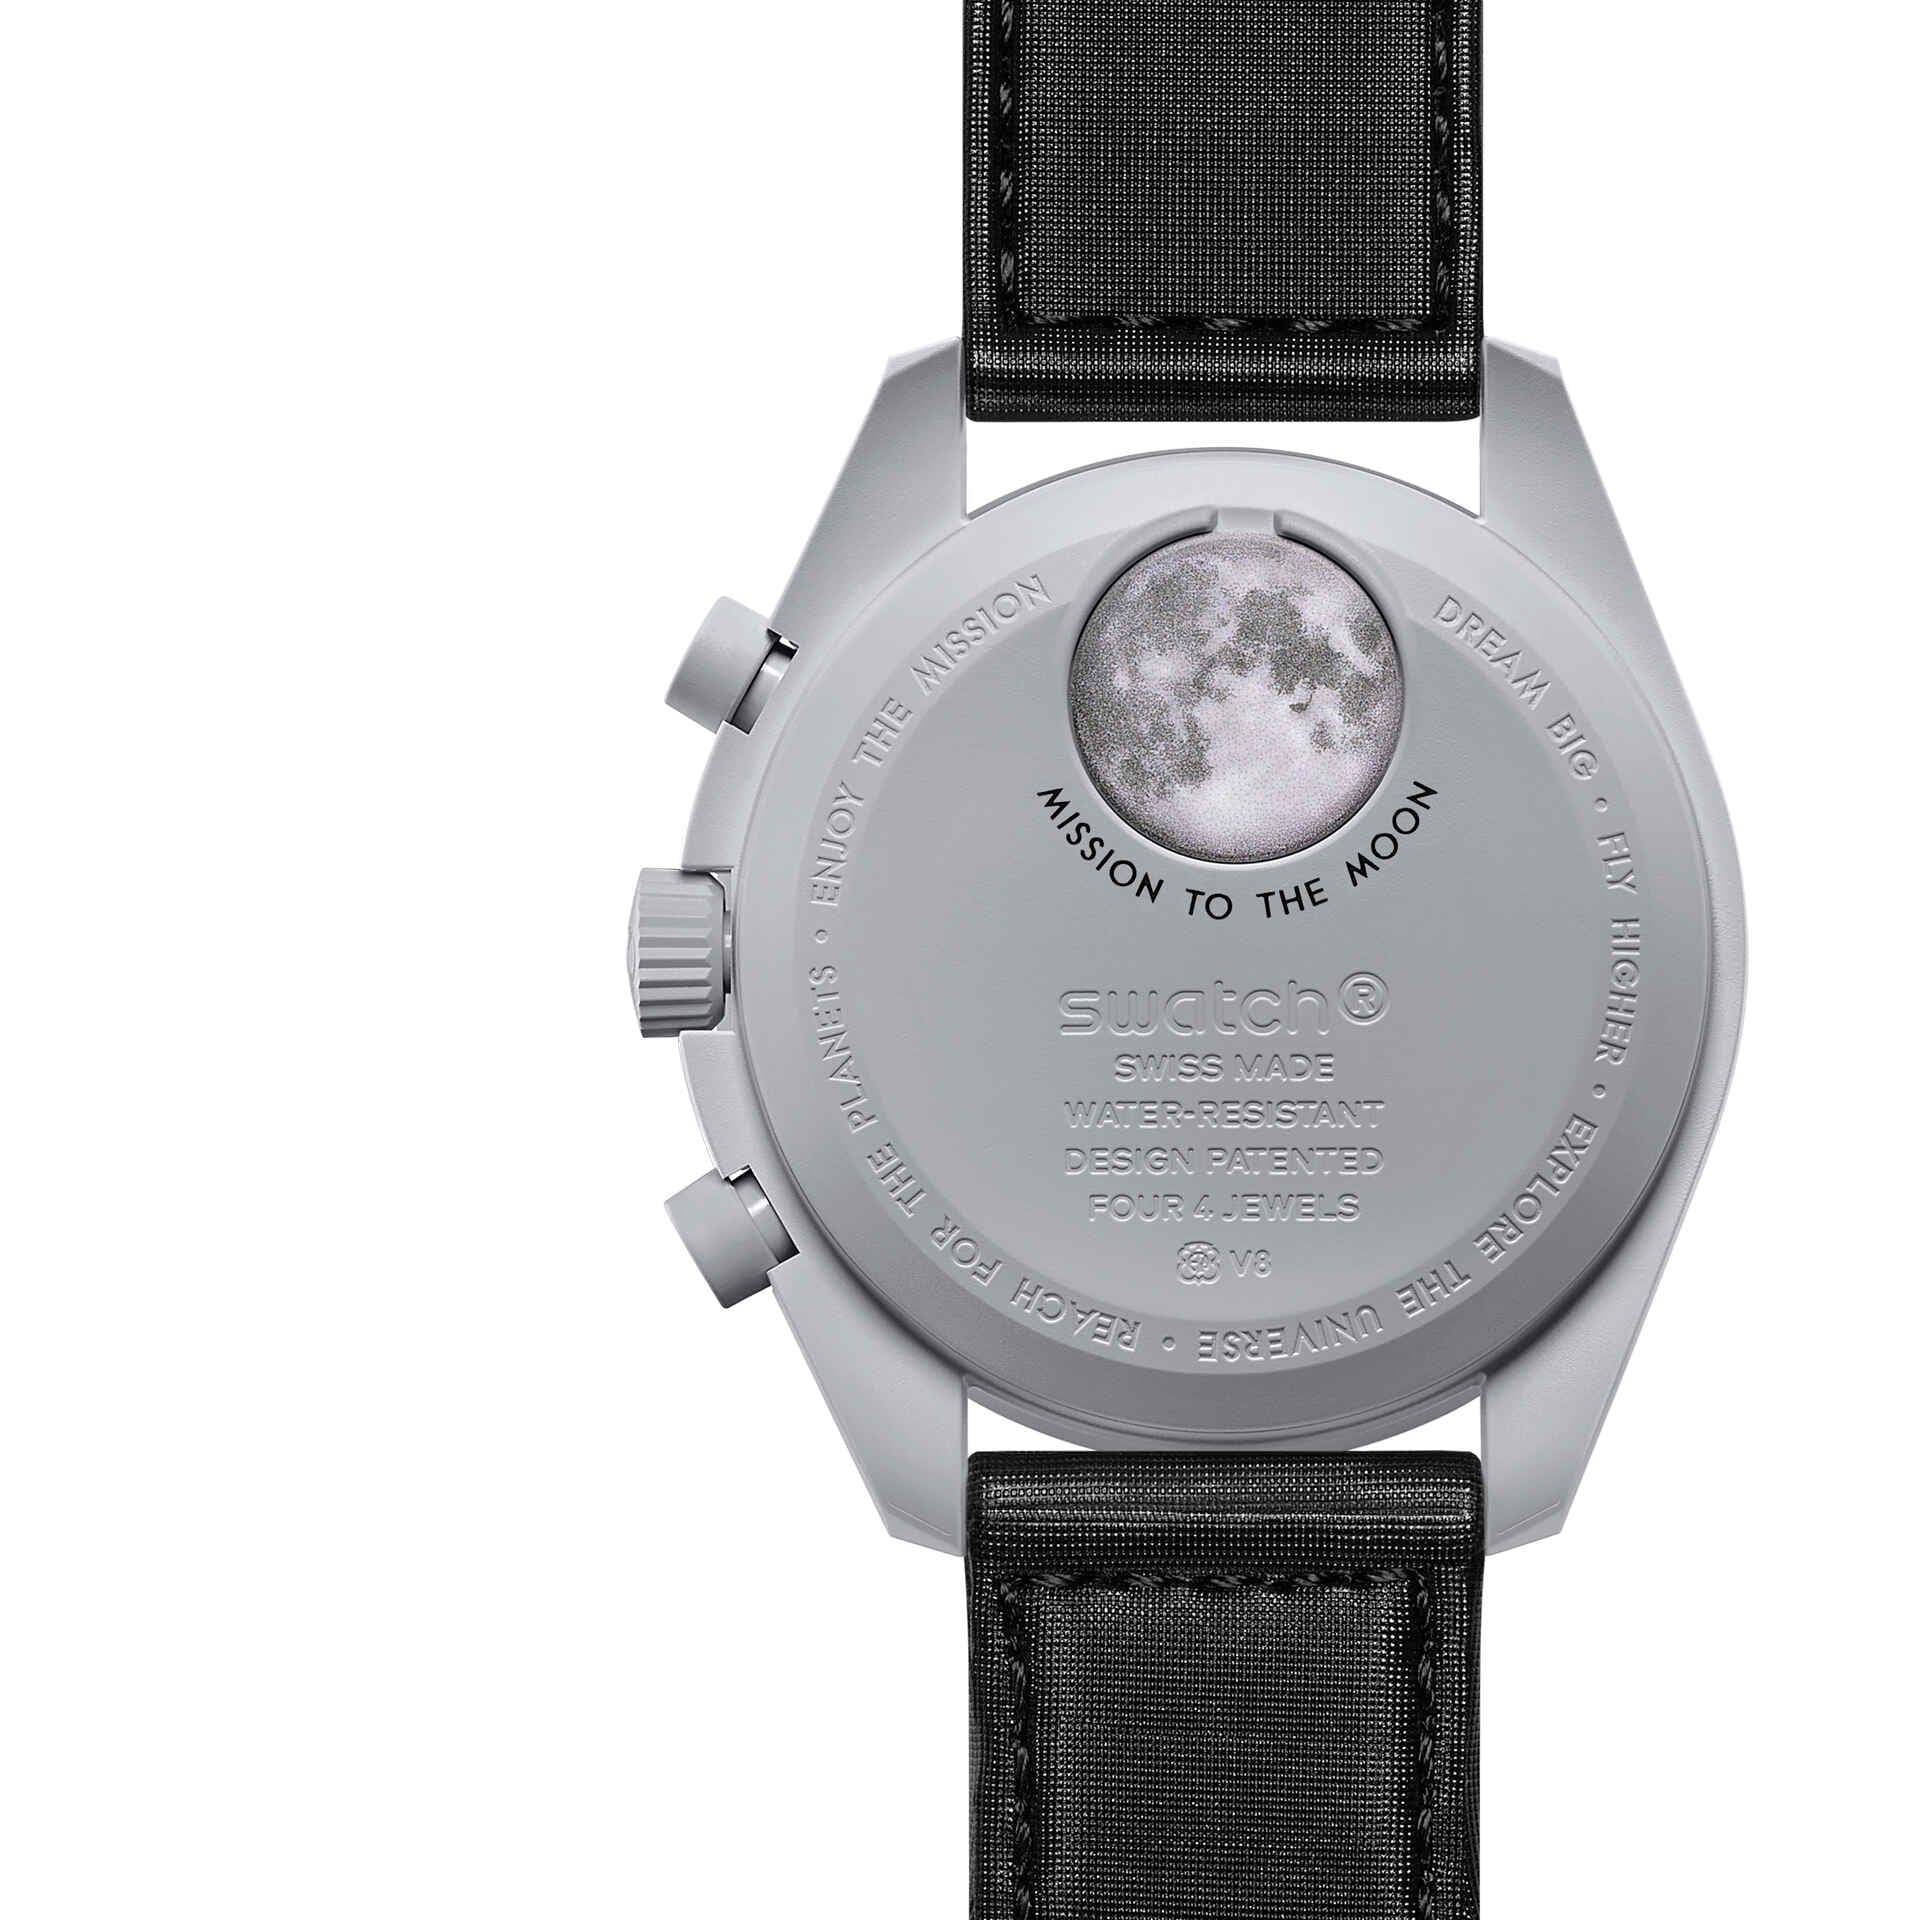 SO33M100 - MISSION TO THE MOON - Swatch® United States